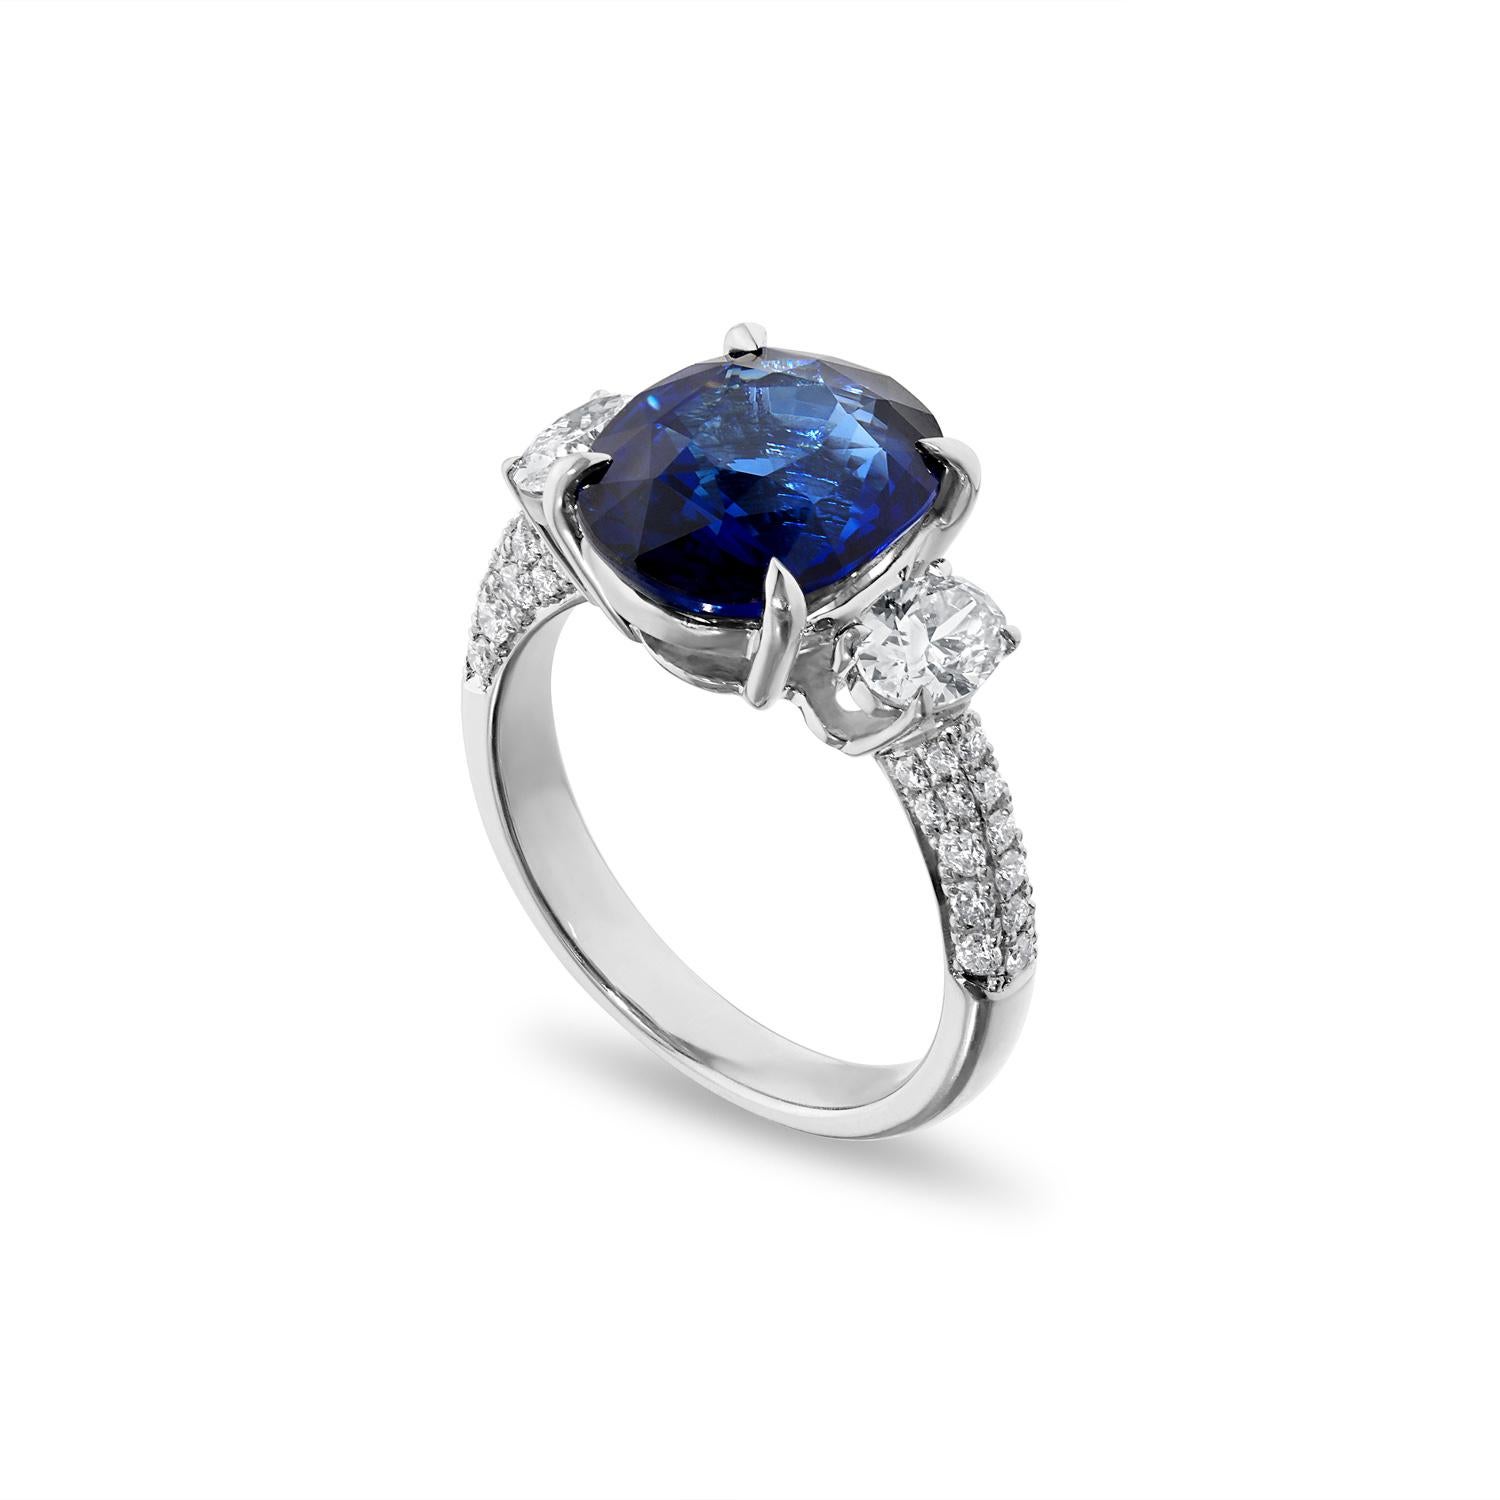 Ceylon sapphire is one of the rarest and most desirable of all sapphires. Weighing 6.54 carats and certified by GRS.
 This monumental jewel displays the rich deep royal blue hue for which these stones are so coveted. This oval-shaped, modified